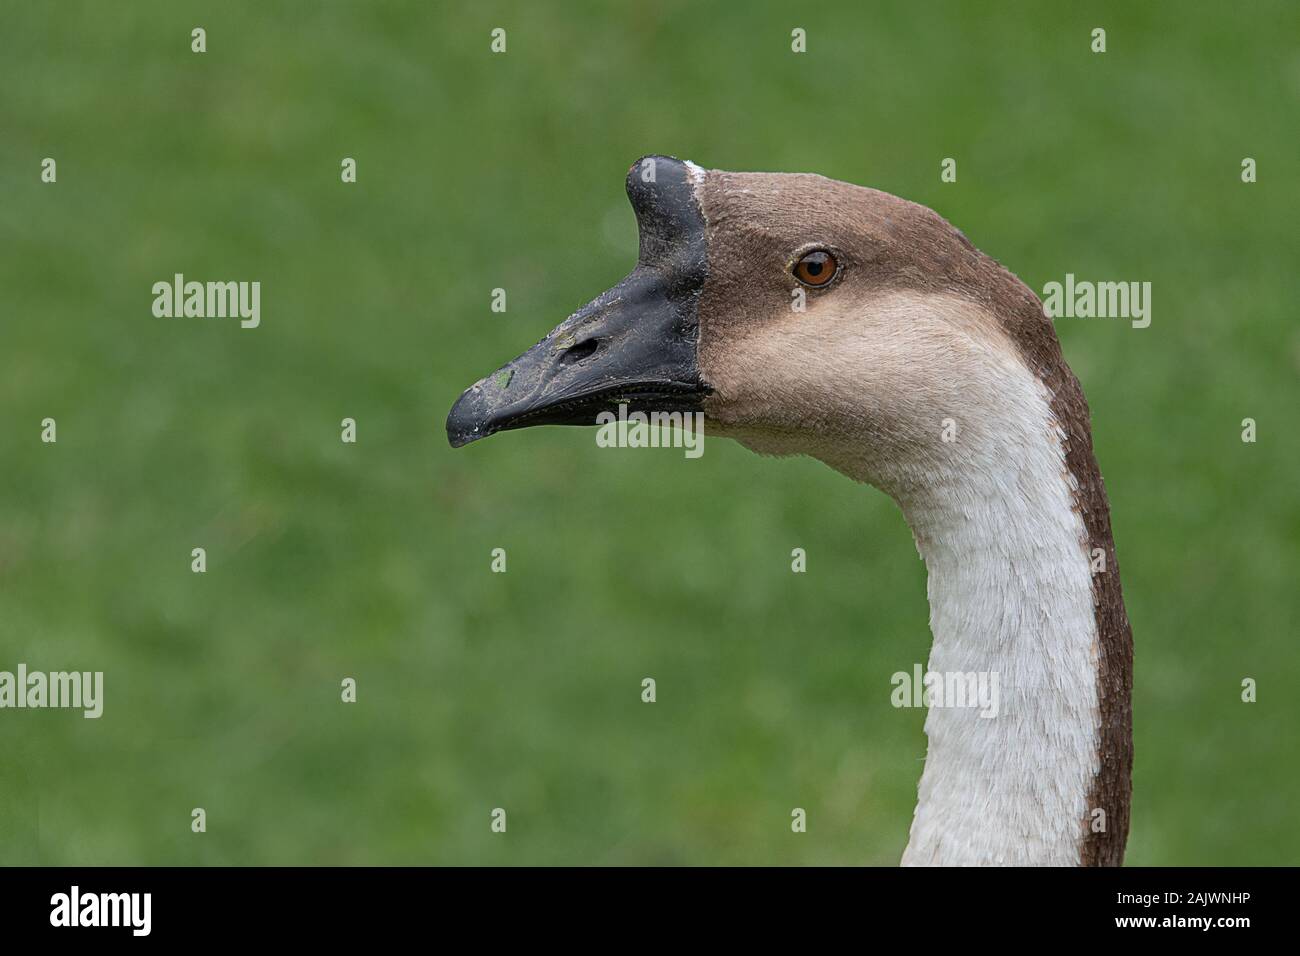 Close up profile portrait of the head and part of the neck of a swan goose, Anser cygnoides Stock Photo